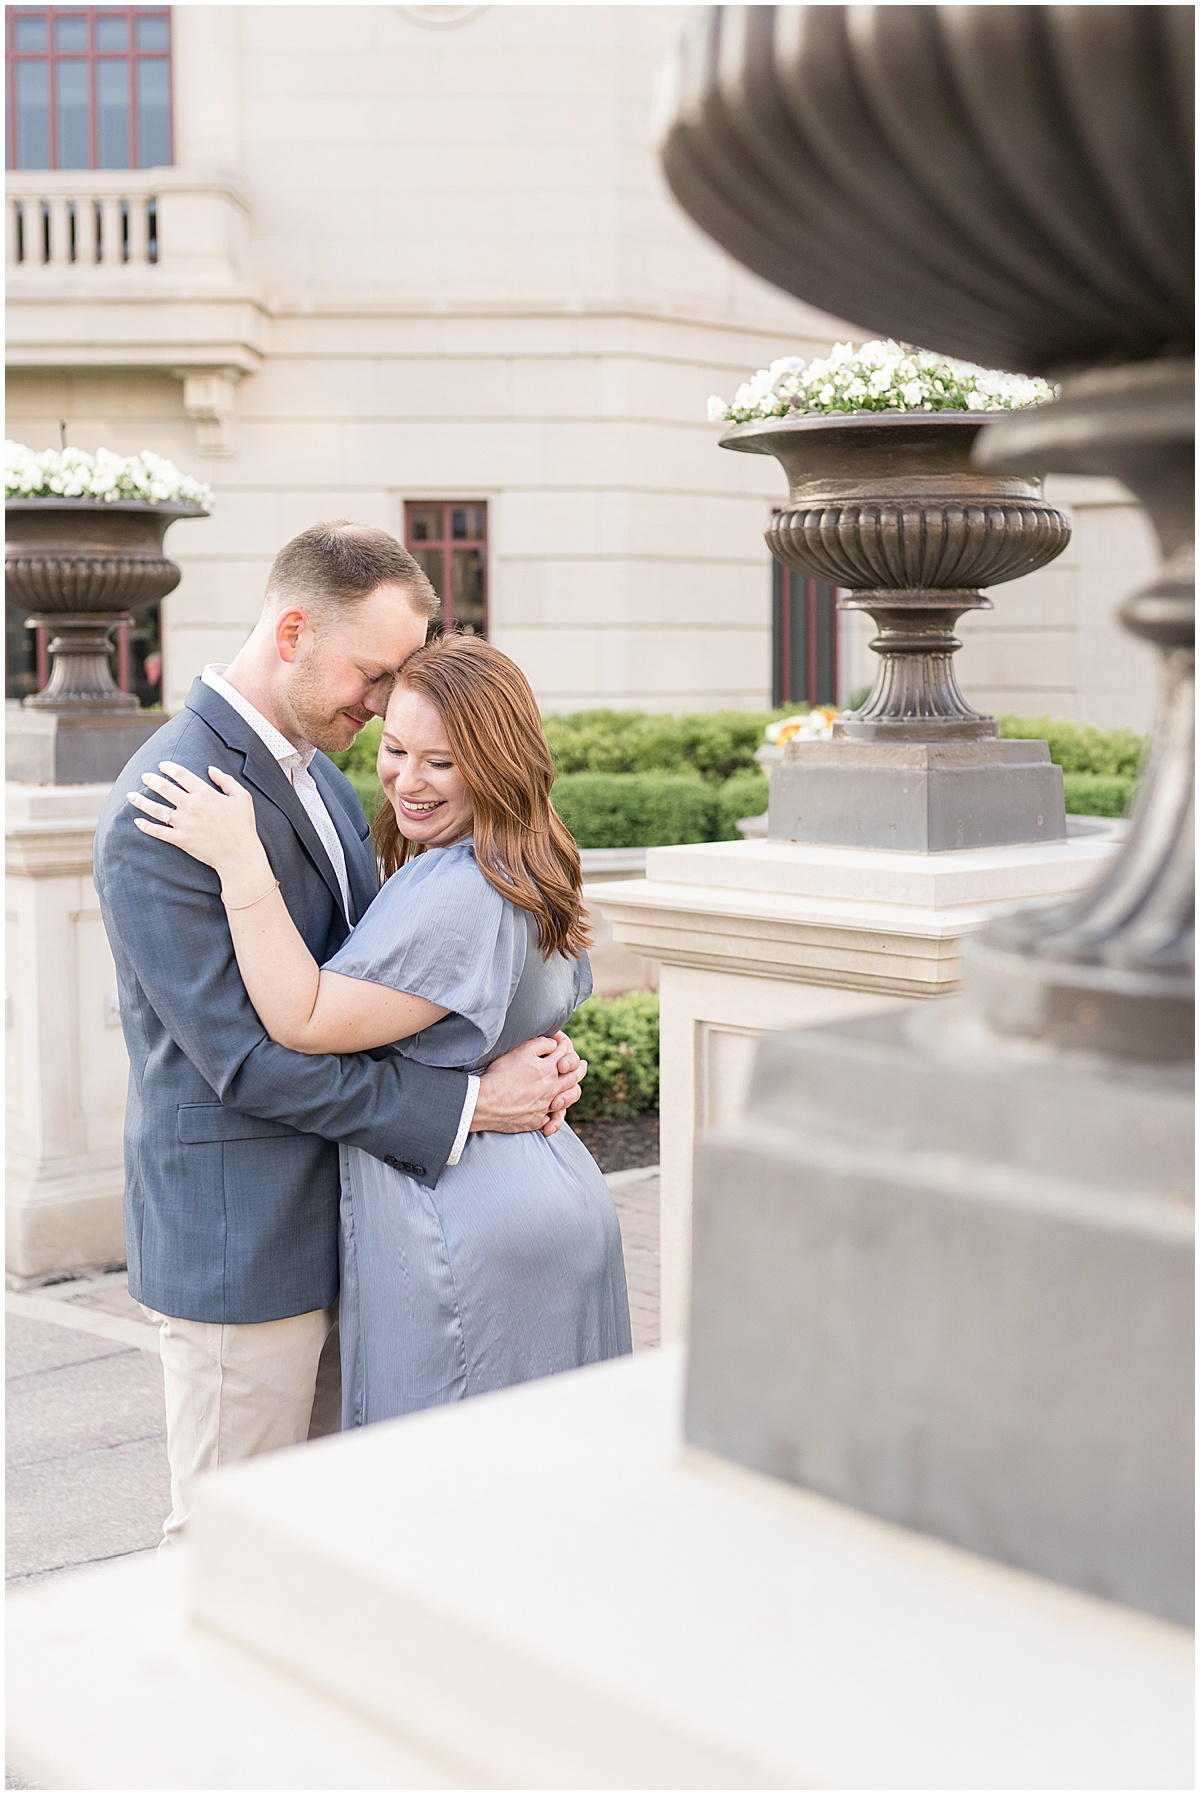 Couple hug next to plants during engagement photos at The Palladium in Carmel, Indiana